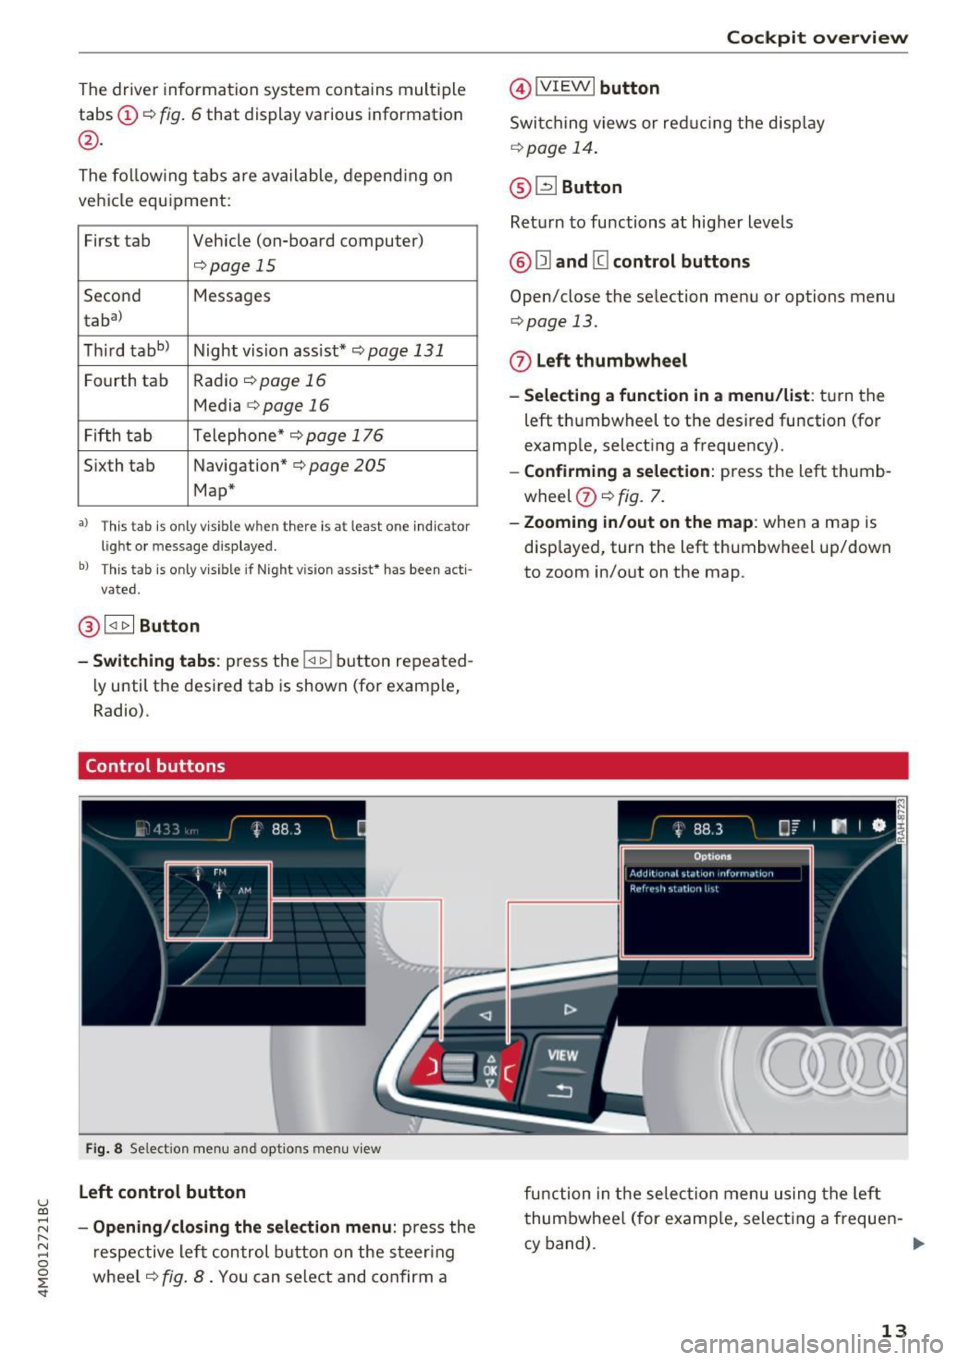 AUDI Q7 2017  Owner´s Manual u (0 
The  driver informa tion  system  contains  mult iple 
tabs © 
c:;, fig. 6 that  display  various  information 
@. 
The  fo llow ing  tab s  are  ava ilable,  depend ing  o n 
ve hicl e  equ ip